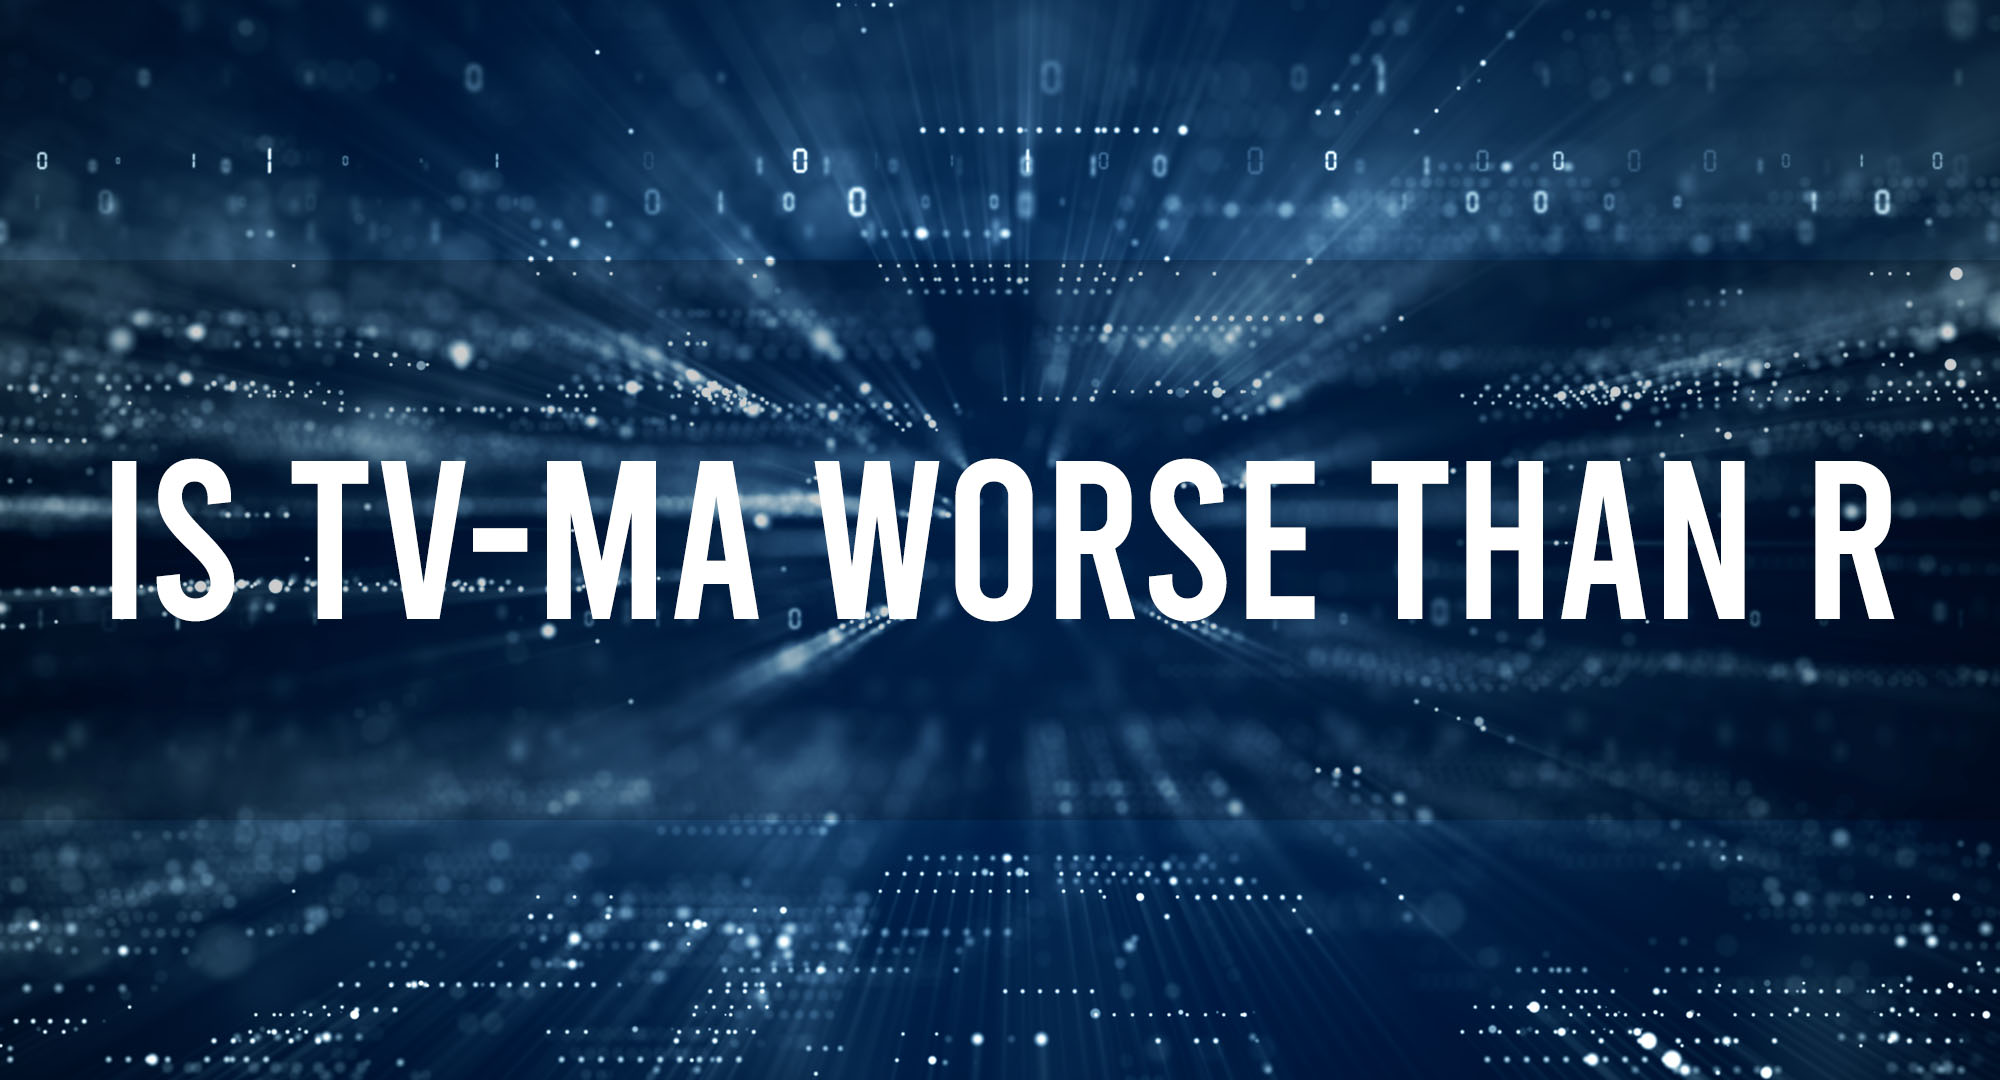 Is TV-MA Worse Than R